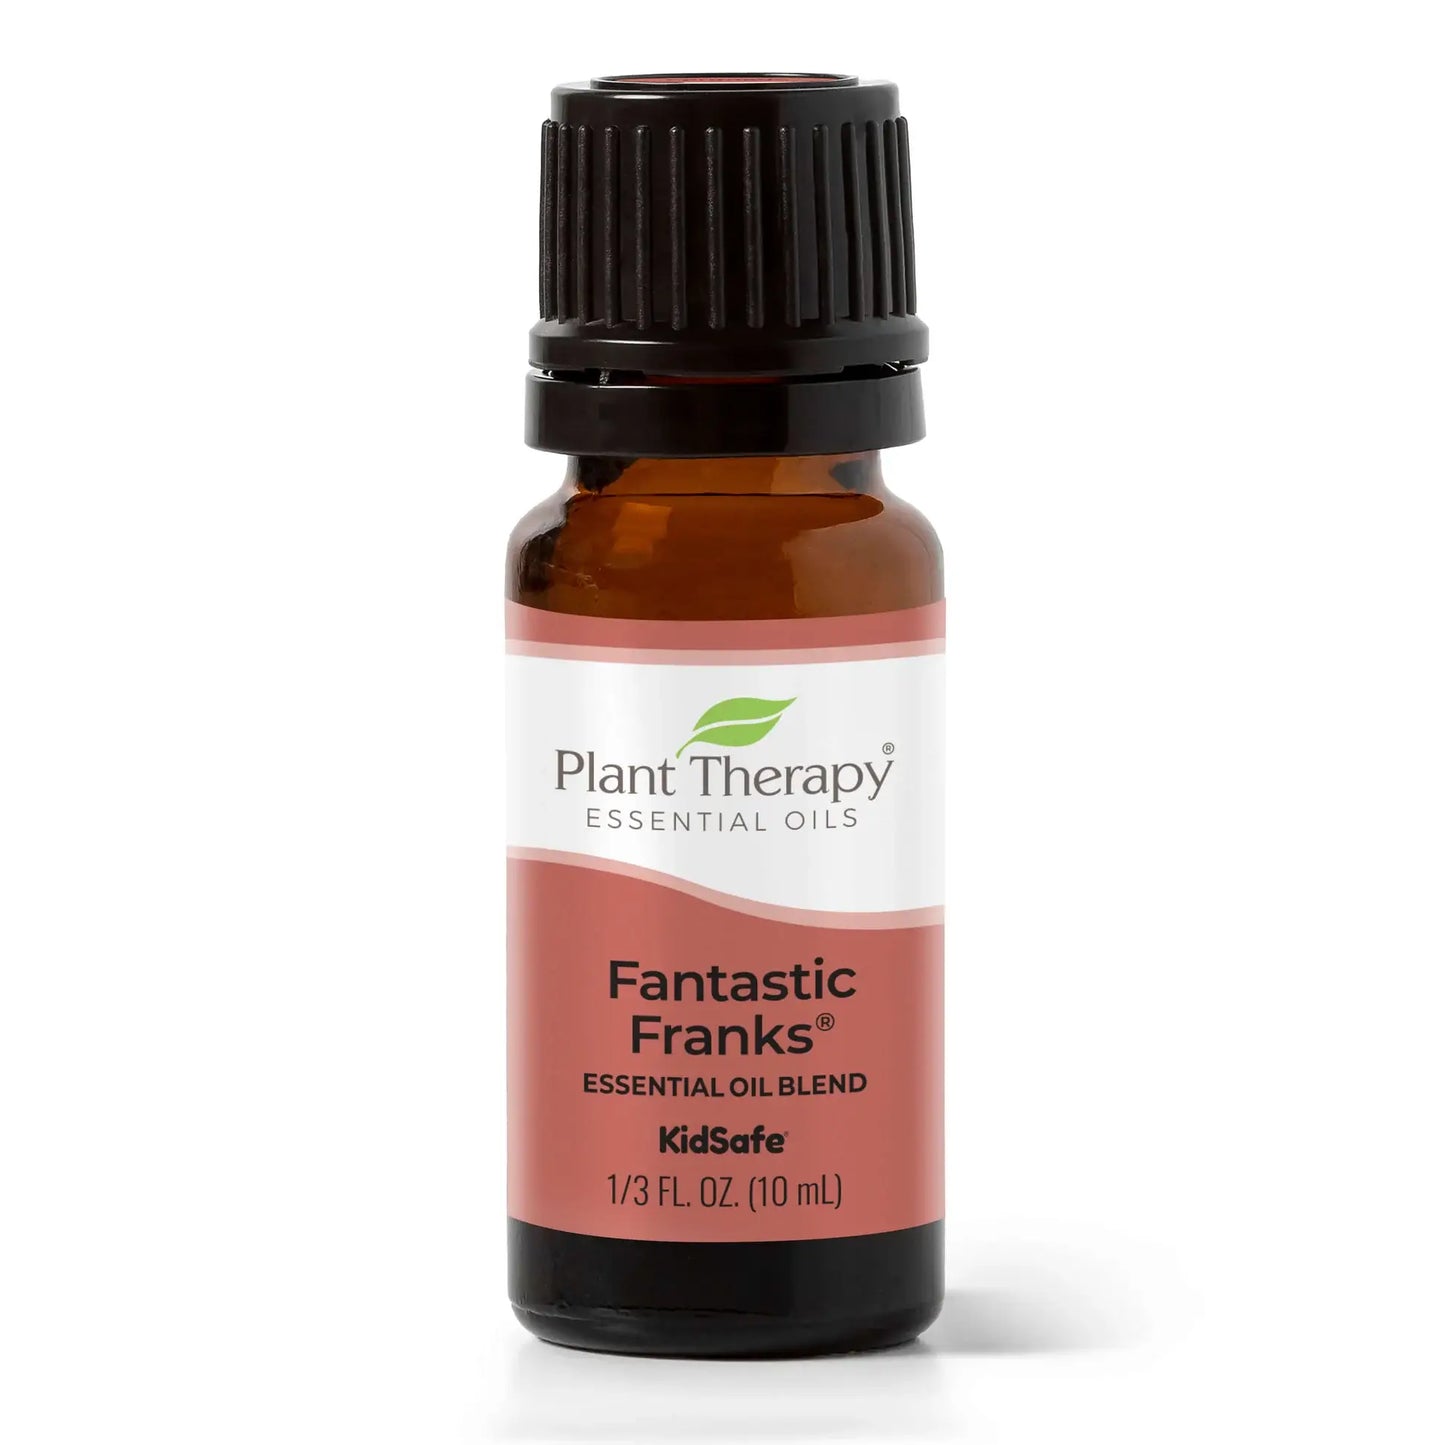 Plant Therapy - Fantastic Franks Essential Oil Blend 10 ml